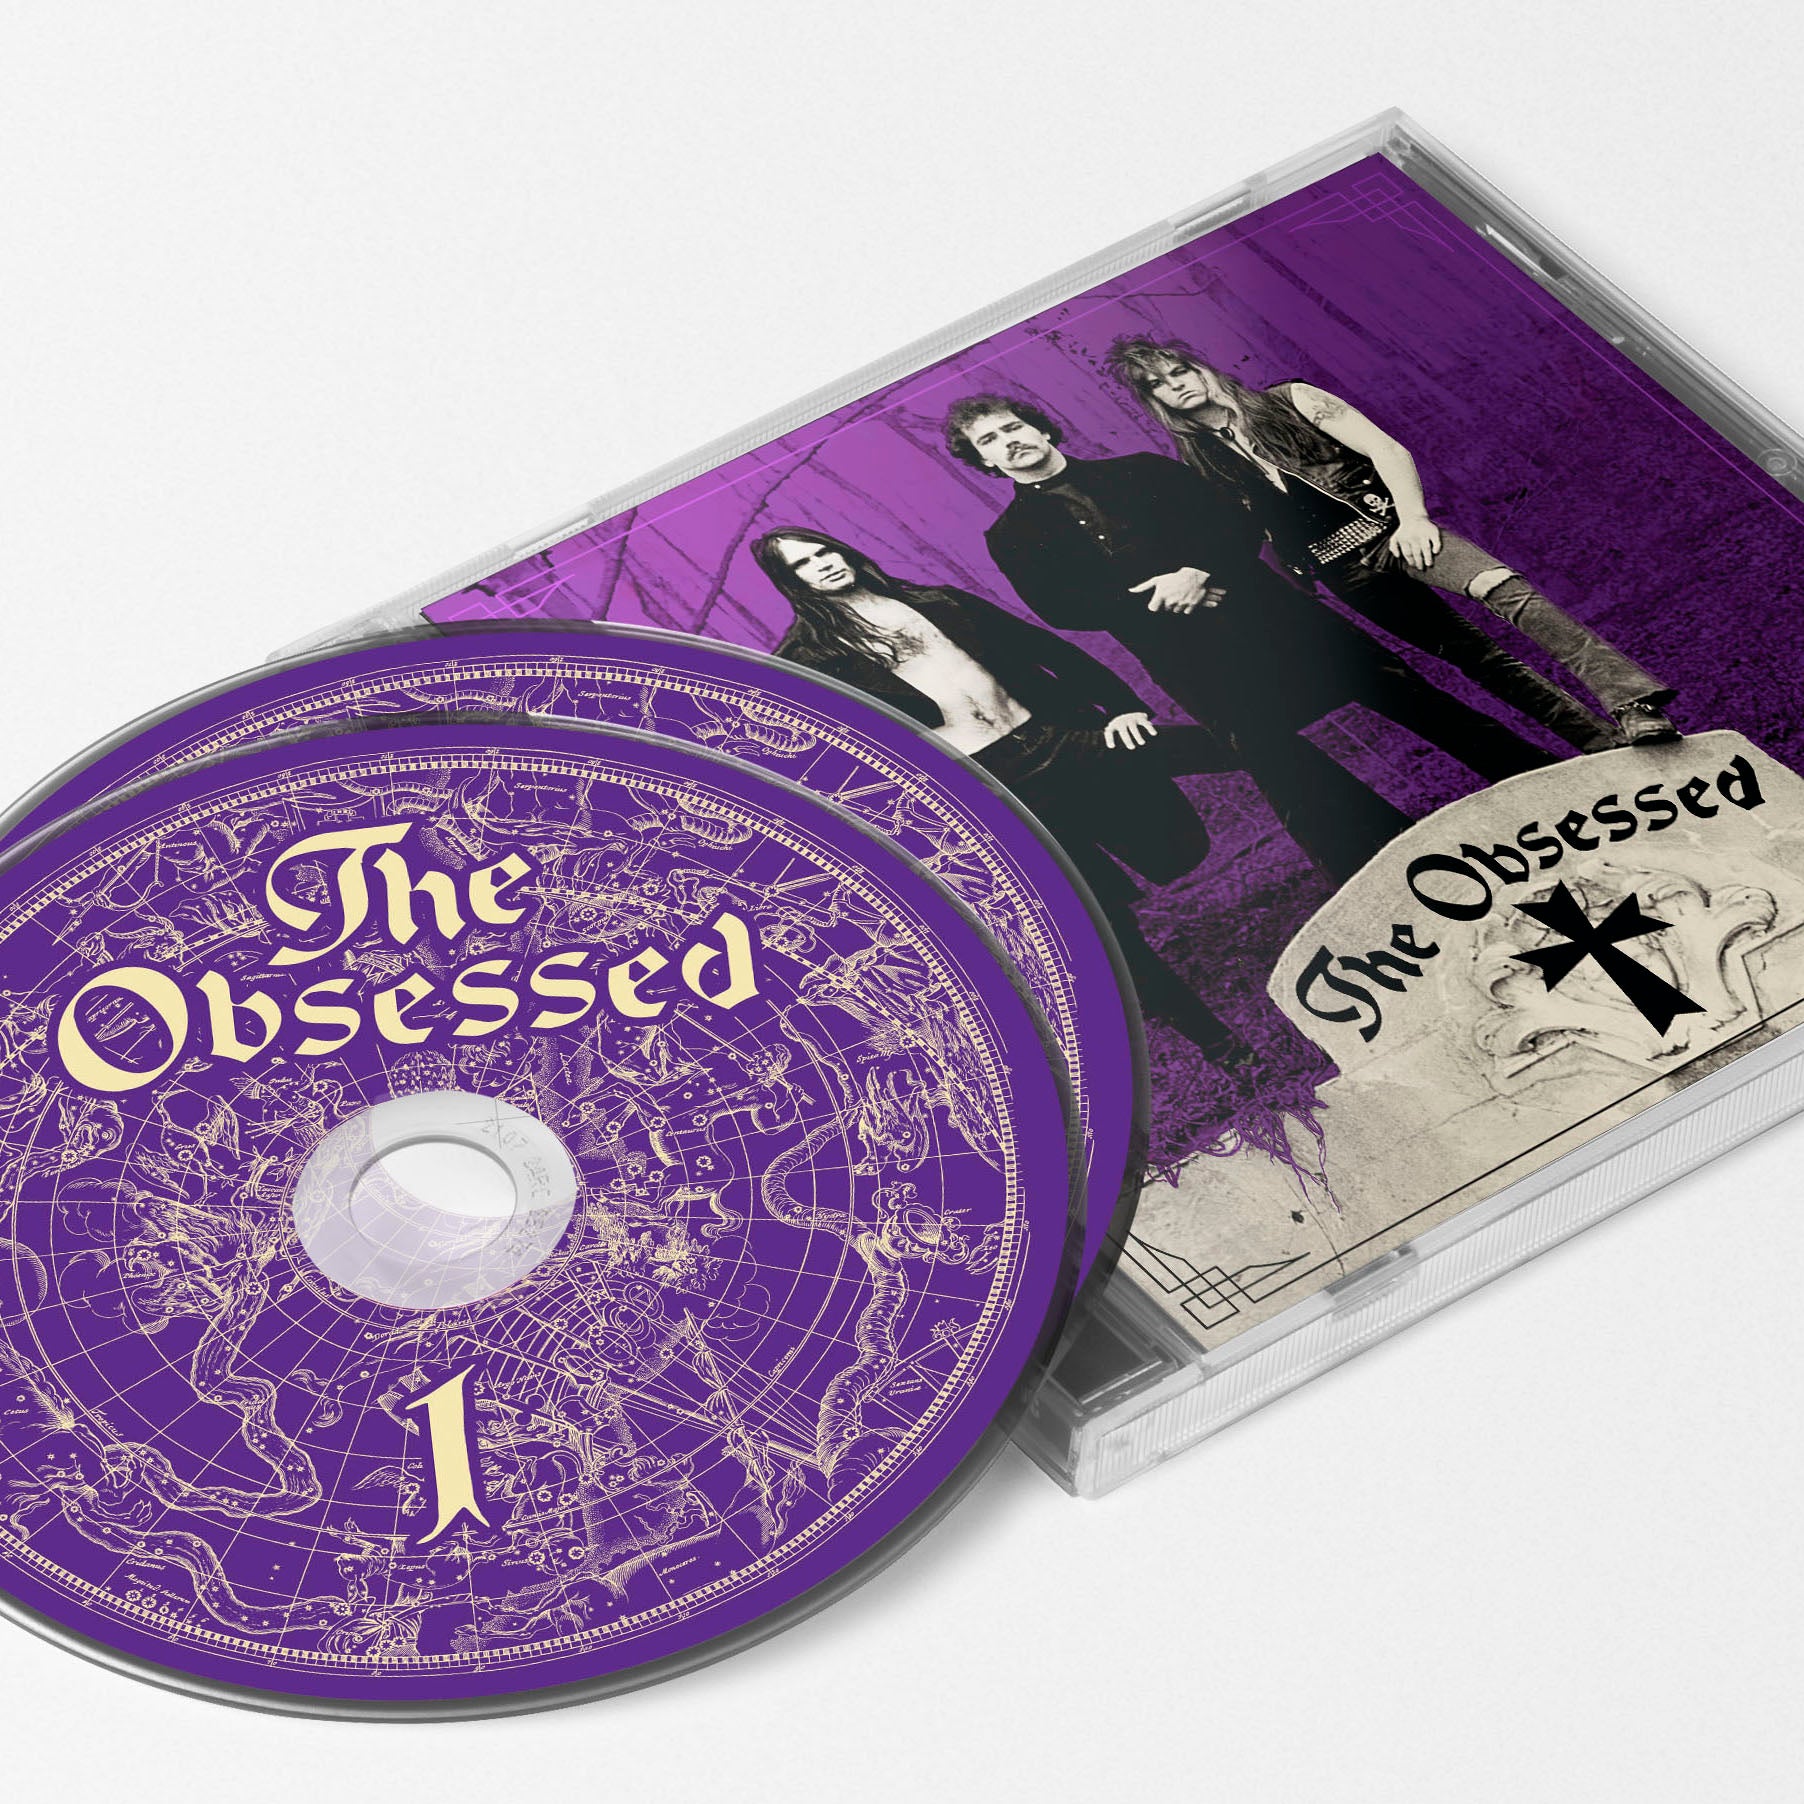 The Obsessed "The Obsessed (Reissue)" 2xCD